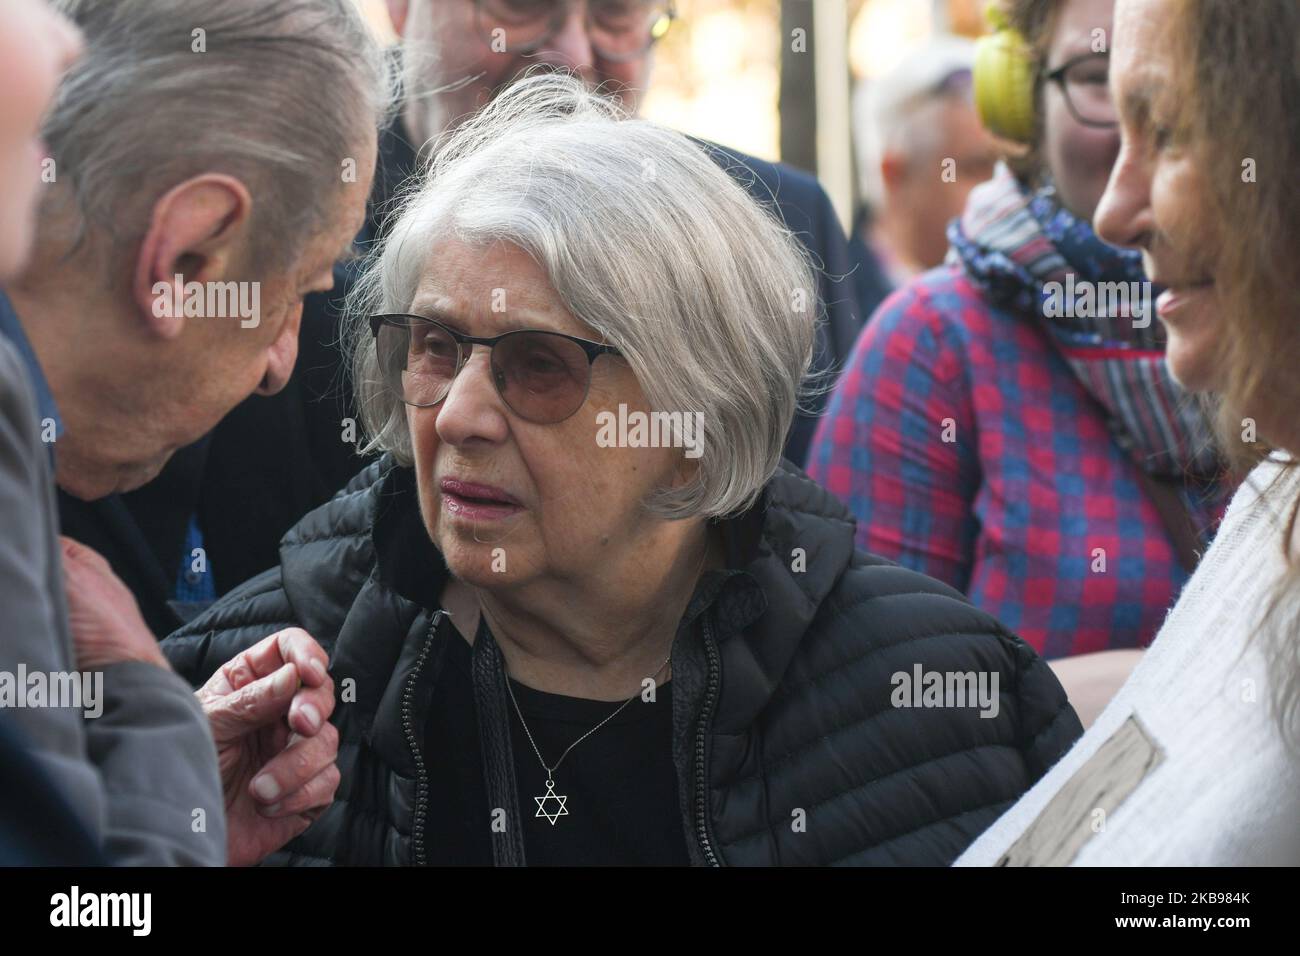 Krystyna Zachwatowicz, seen during the opening of Gustaw Holoubek square in Krakow. Krystyna Zachwatowicz, a Polish scenographer, costume designer and actress, is the wife of the late film director Andrzej Wajda. On Friday, October 25, 2019, in Krakow, Poland. (Photo by Artur Widak/NurPhoto) Stock Photo